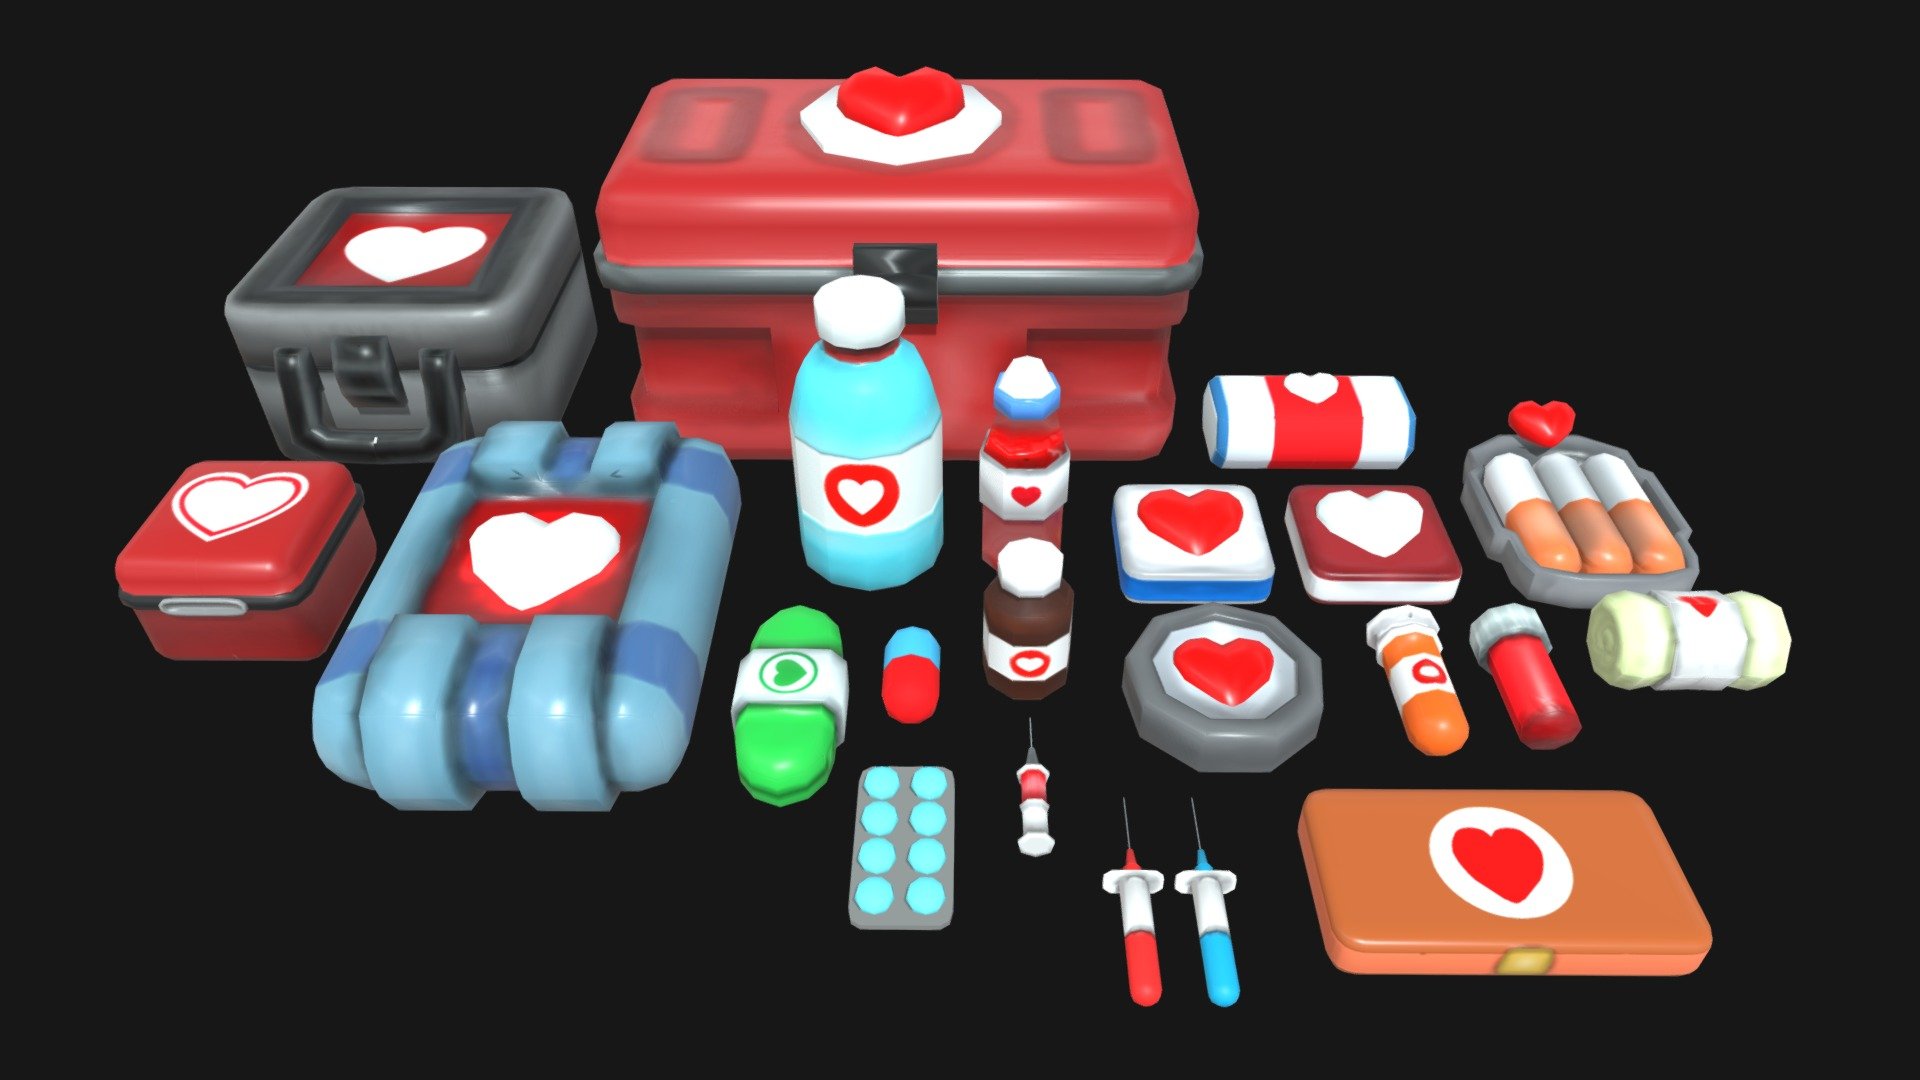 The file contains:




Textures in 1024x1024 with NormalMaps for each object

Blender file for editions

UVMapped objects

The objects of the pack includes:




Medkits

Healthbottles

Syringes

Pills

Bandages

Flasks

The materials of each model was handpainted by me on Blender

I created this model aiming at the development of cartoon games that use lowpoly models, but depending on your needs you can use it wherever you prefer 3d model